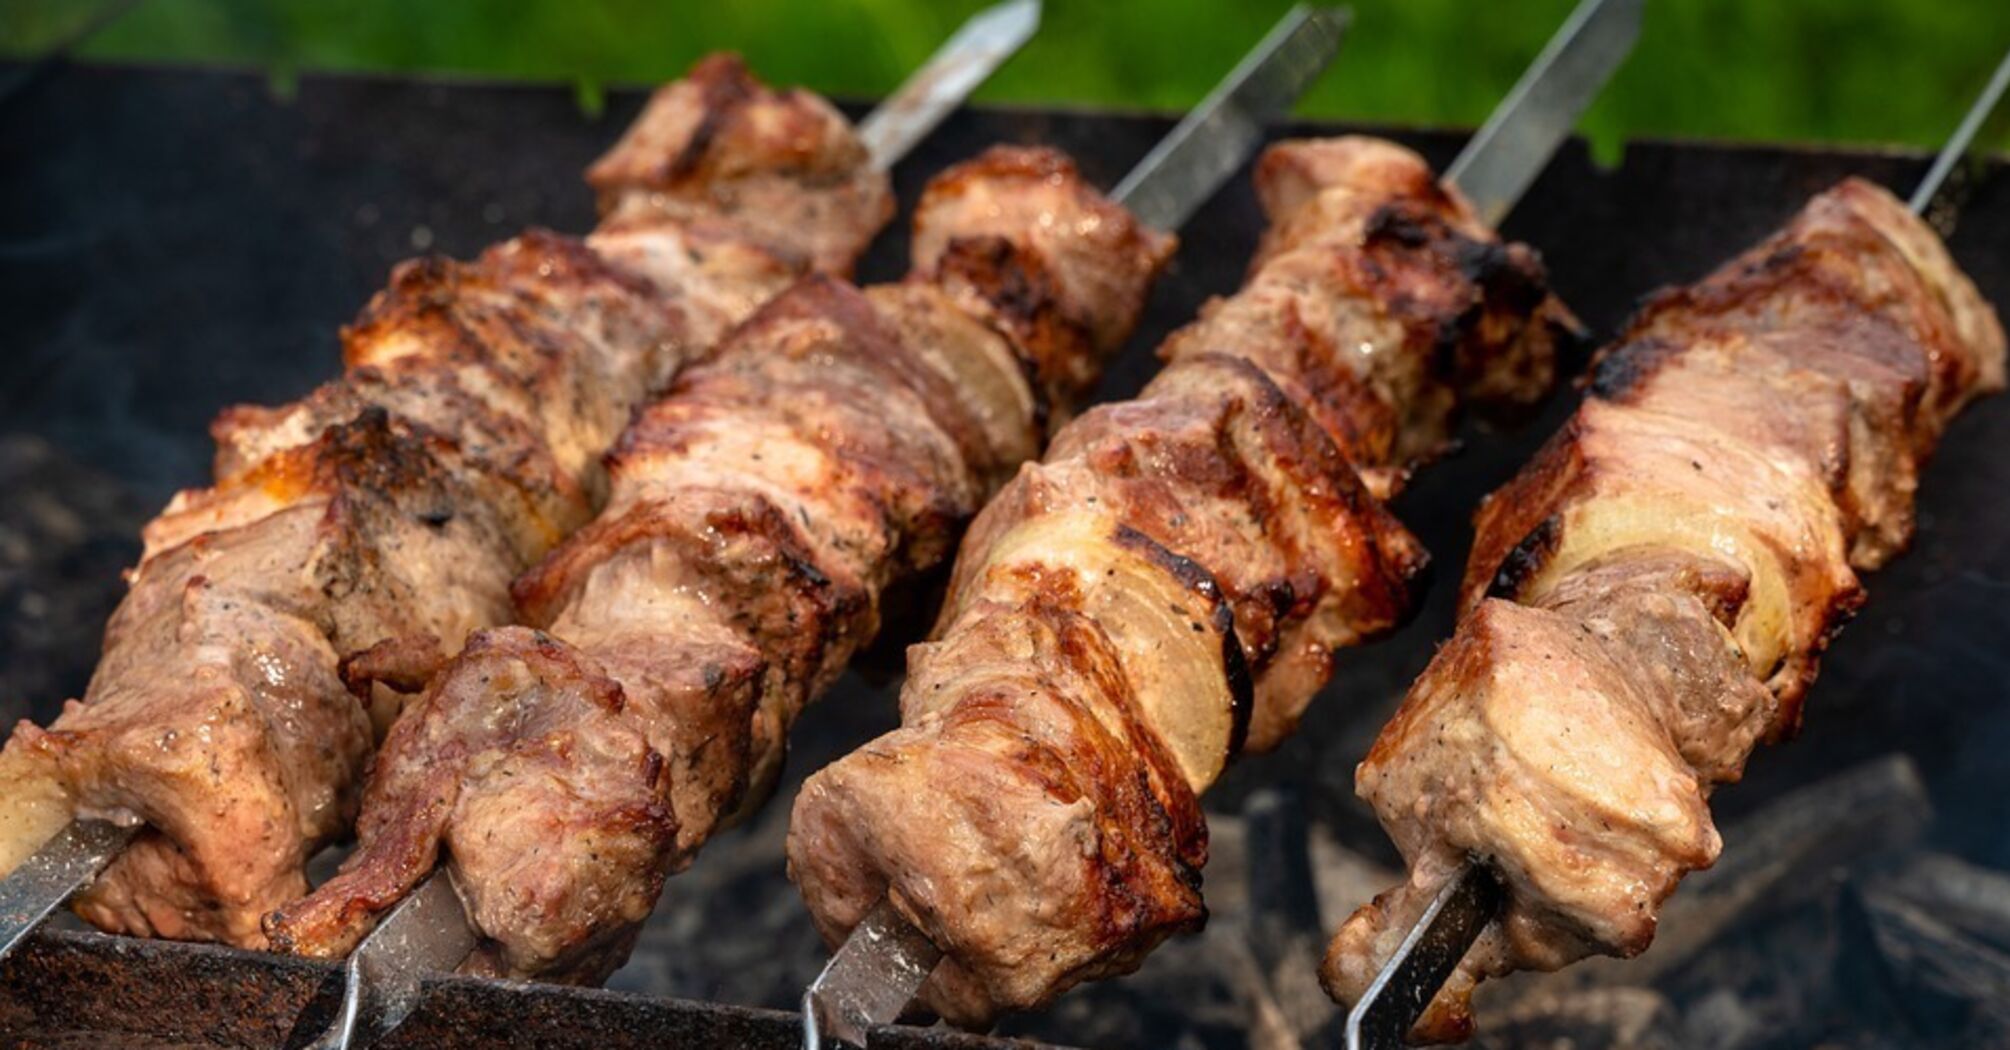 How to skewer meat for kebabs properly to ensure its juiciness